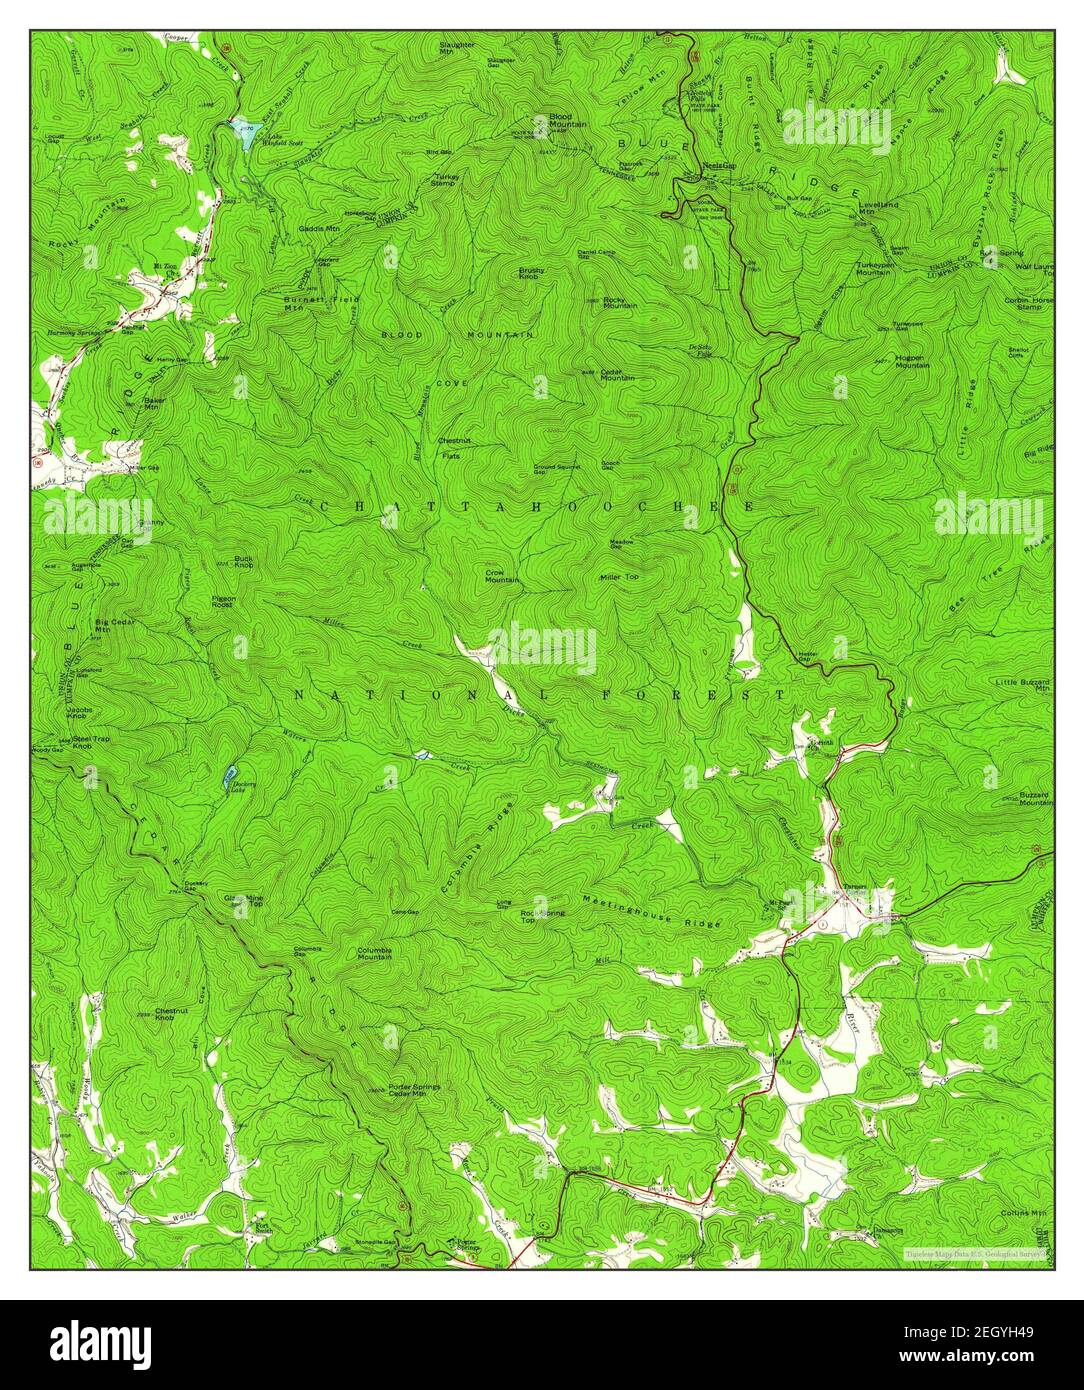 Neels Gap, Georgia, map 1950, 1:24000, United States of America by Timeless Maps, data U.S. Geological Survey Foto Stock